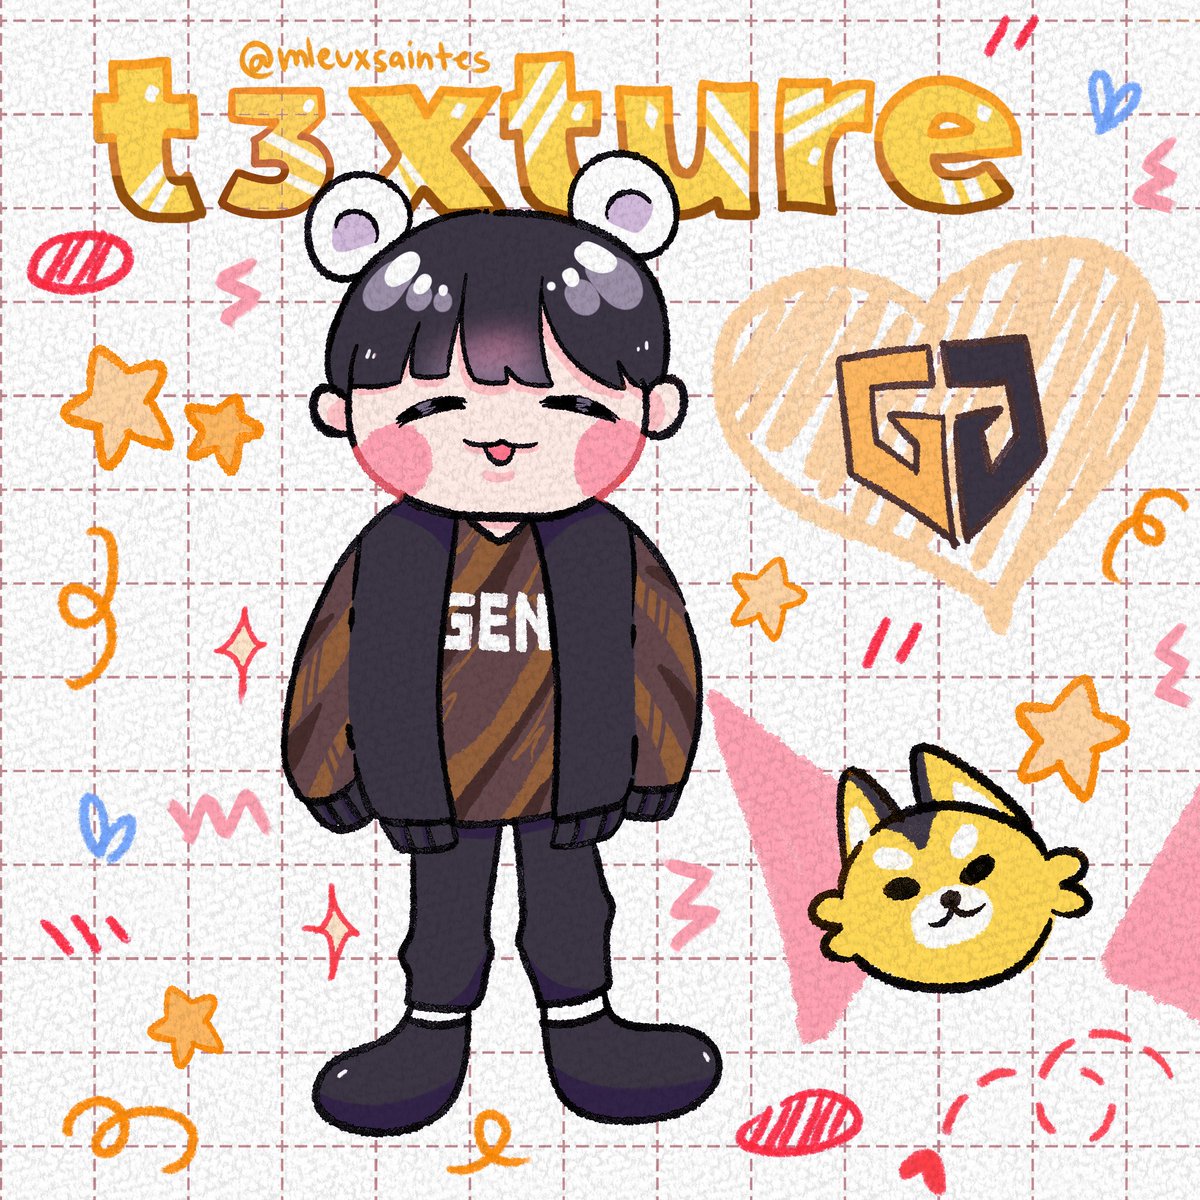 drew a quick doodle for this cutie patootie 🐻‍❄️ #GENGWIN #GENGVAL